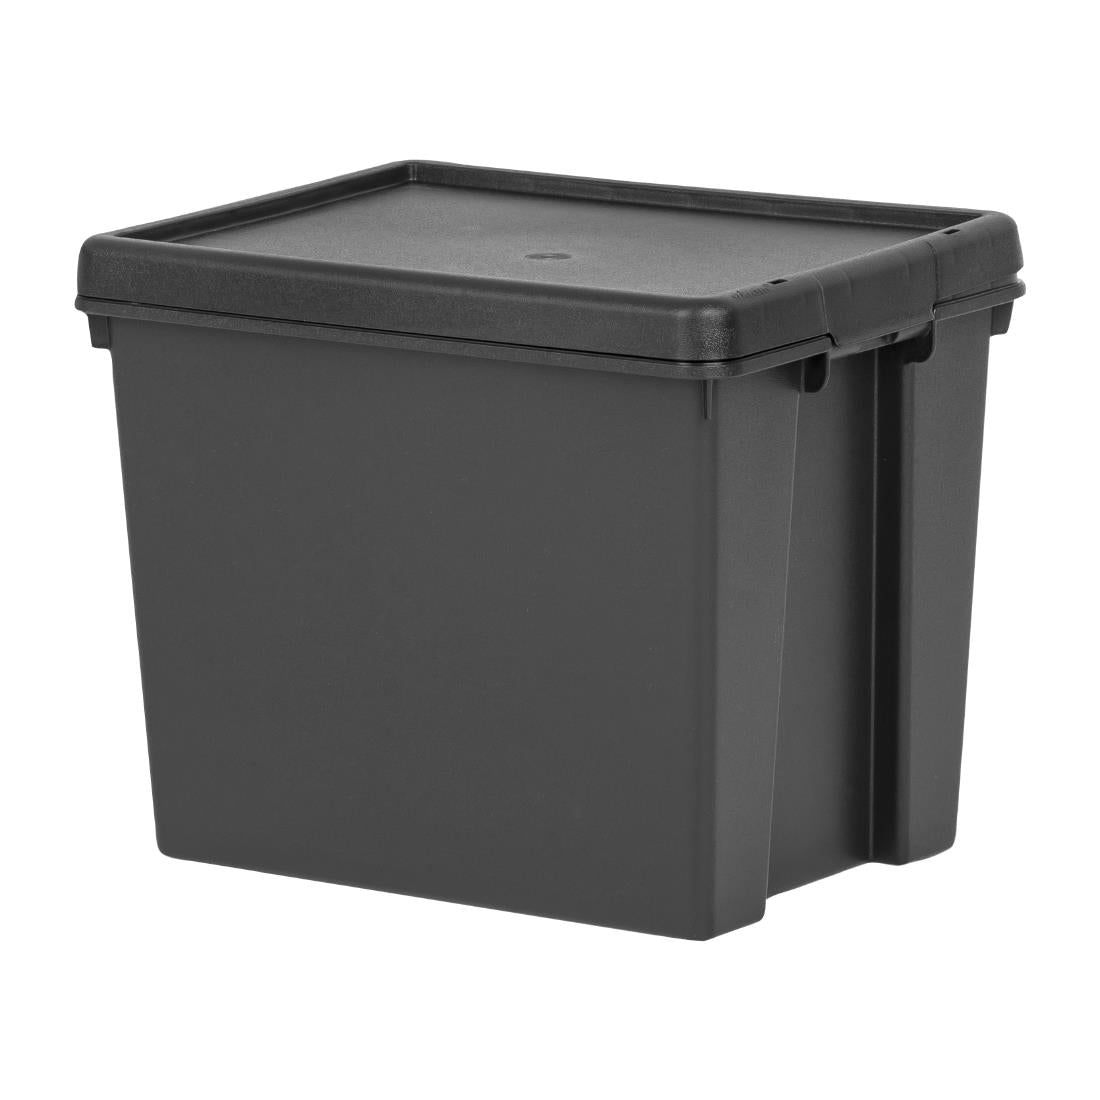 CX091 Wham Bam Recycled Storage Box & Lid Black 24Ltr JD Catering Equipment Solutions Ltd